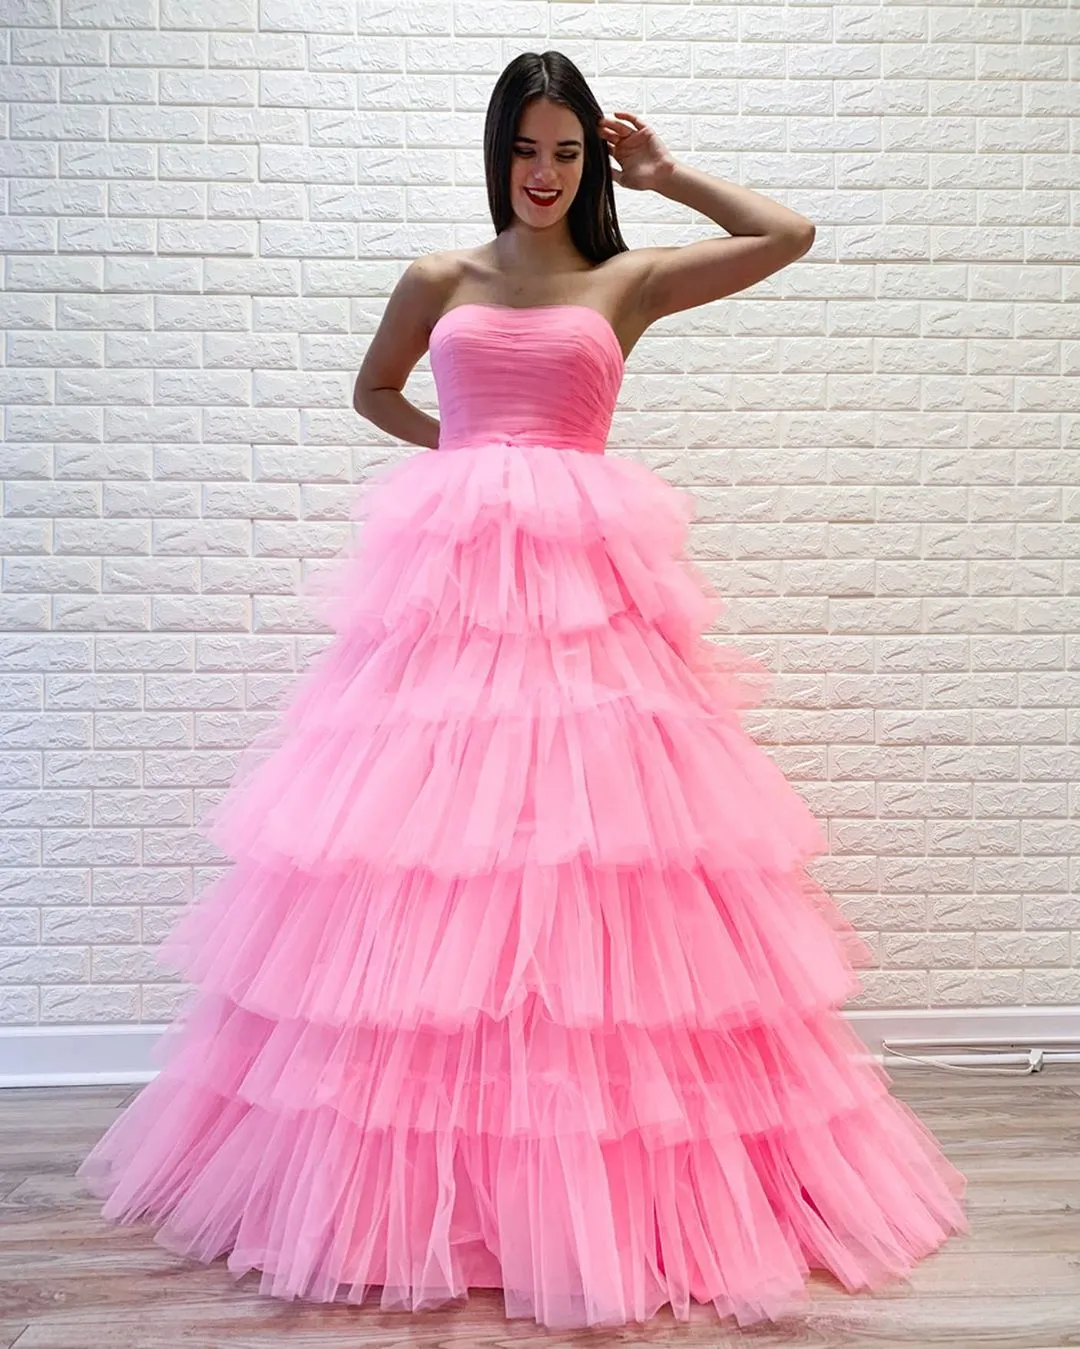 Sleeping Beauty Inspired Prom Dress 2020 Ballgown Ruffles Pink Formal Evening Party Gowns Strapless Neck Long Sweet 16 Gowns Cupcake